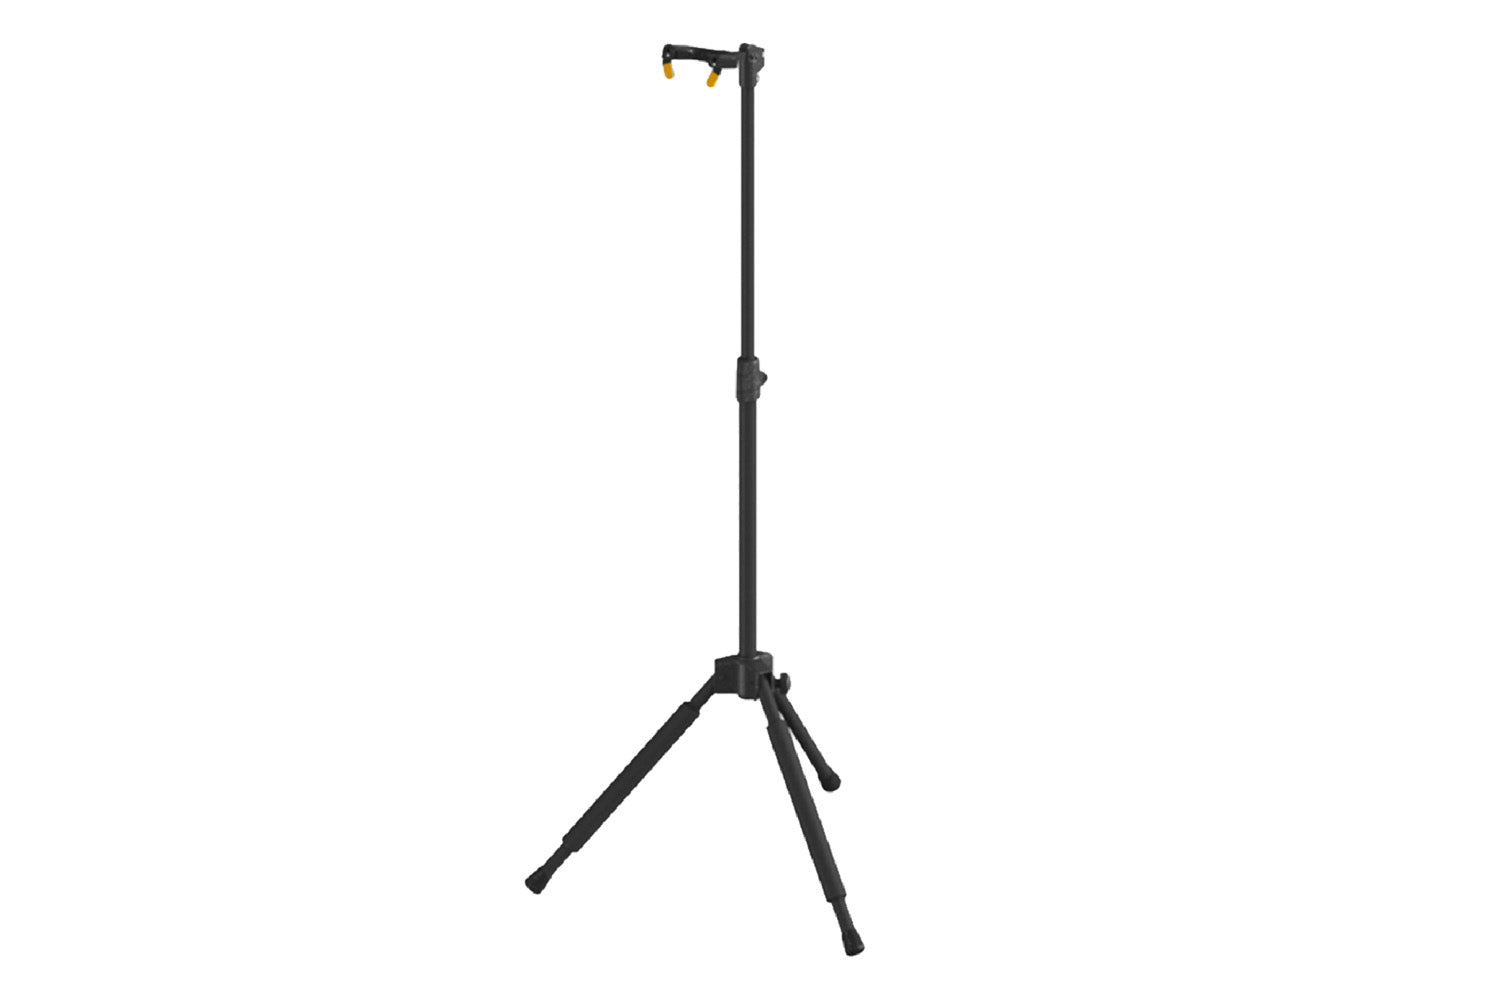 SG721 - Guitar stand with 450-1160mm height adjustment